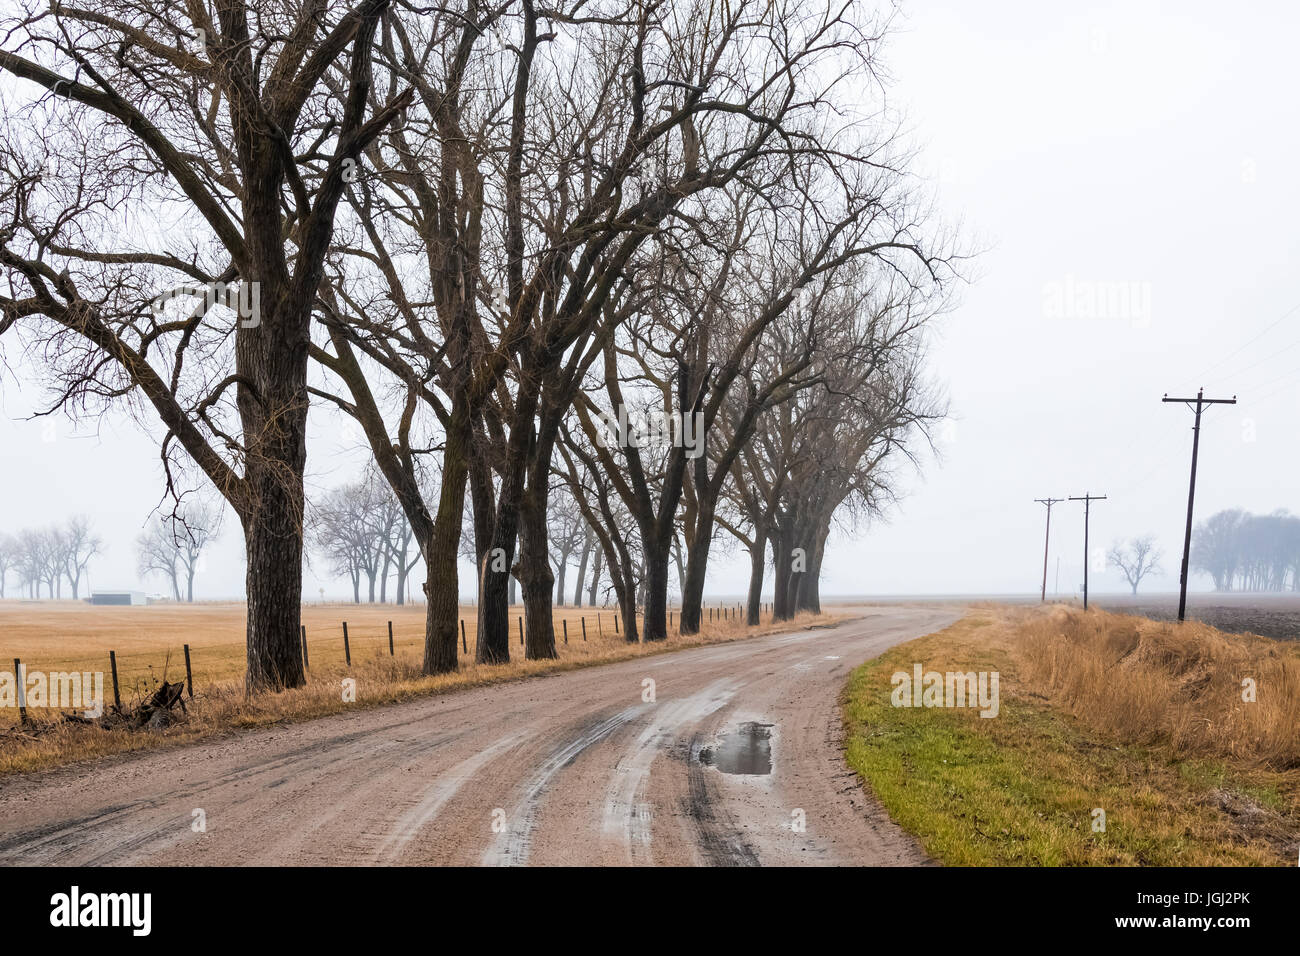 Eastern Cottonwood, Populus deltoides, trees in spring before leafing out, on a foggy morning in the Platte River Valley near Kearney, Nebraska, USA Stock Photo